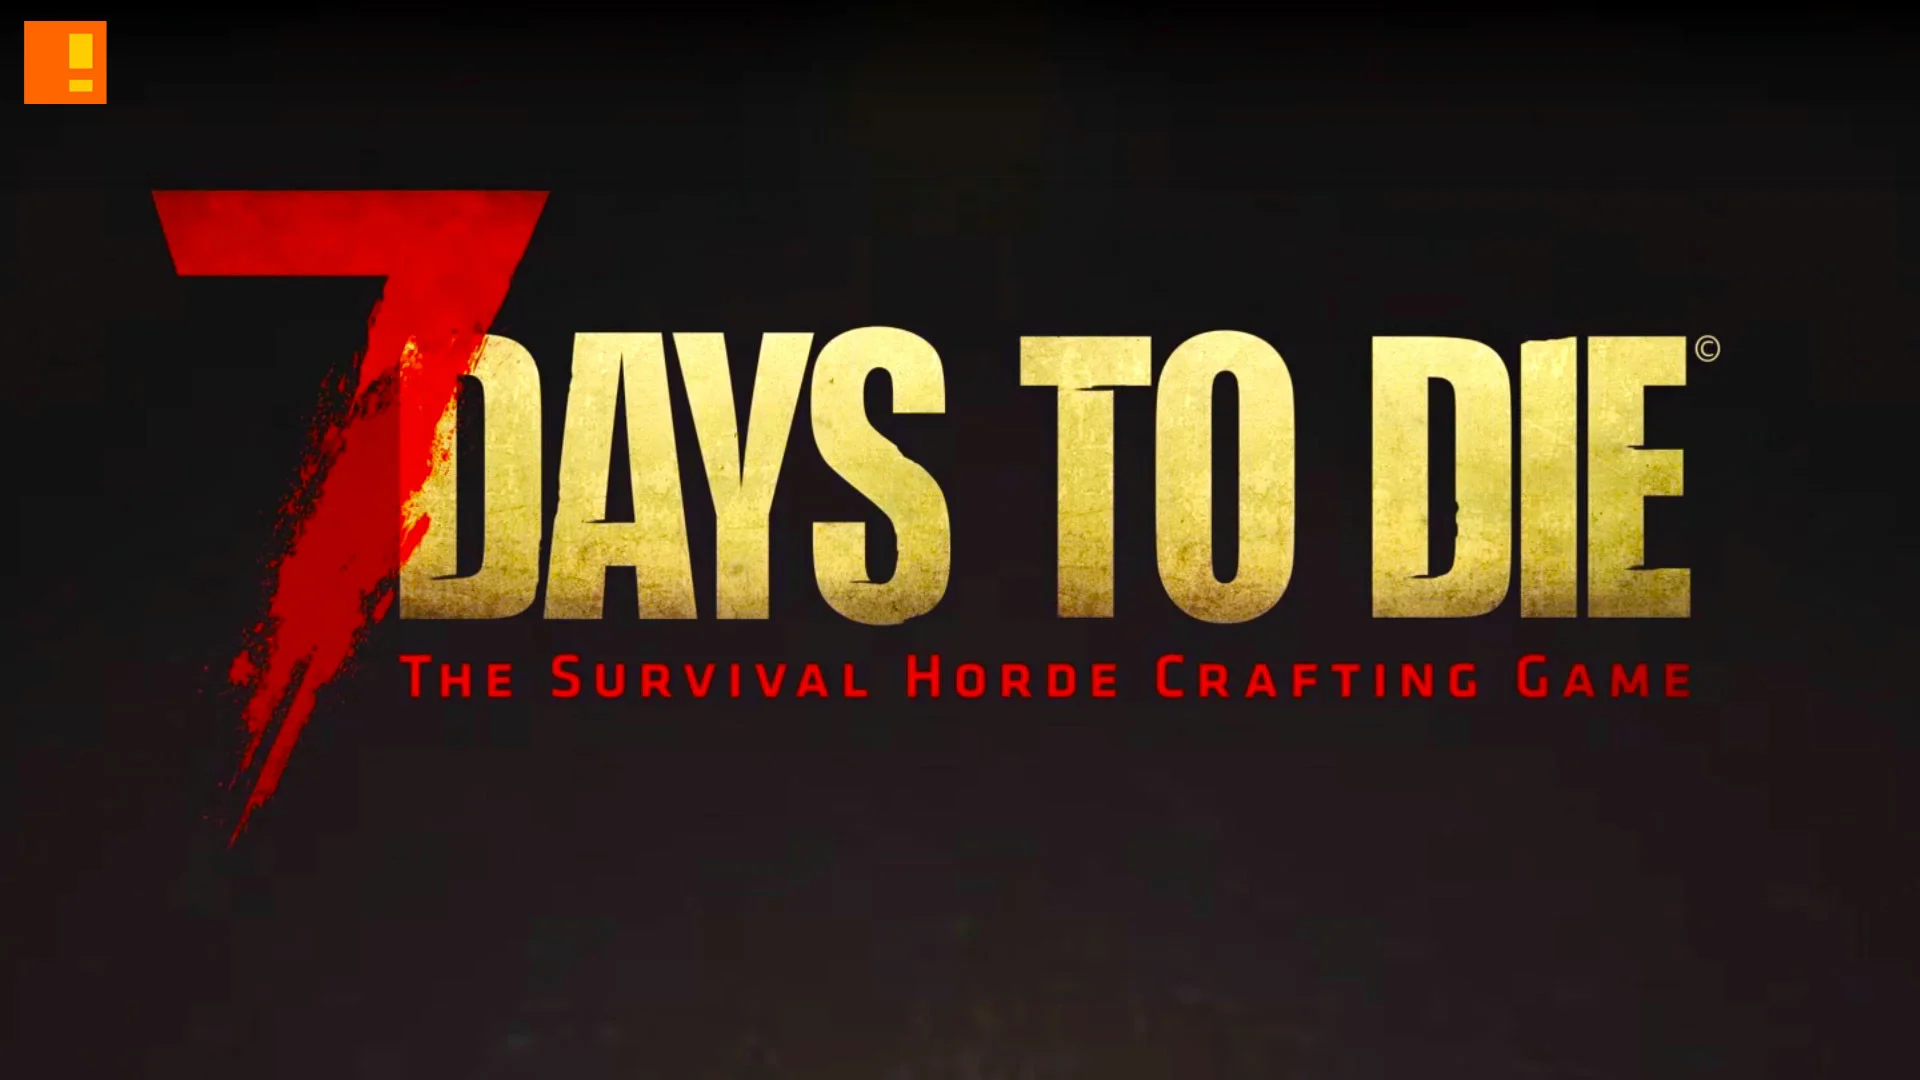 7 days to die, survival, crafting, game, announcement, trailer, live